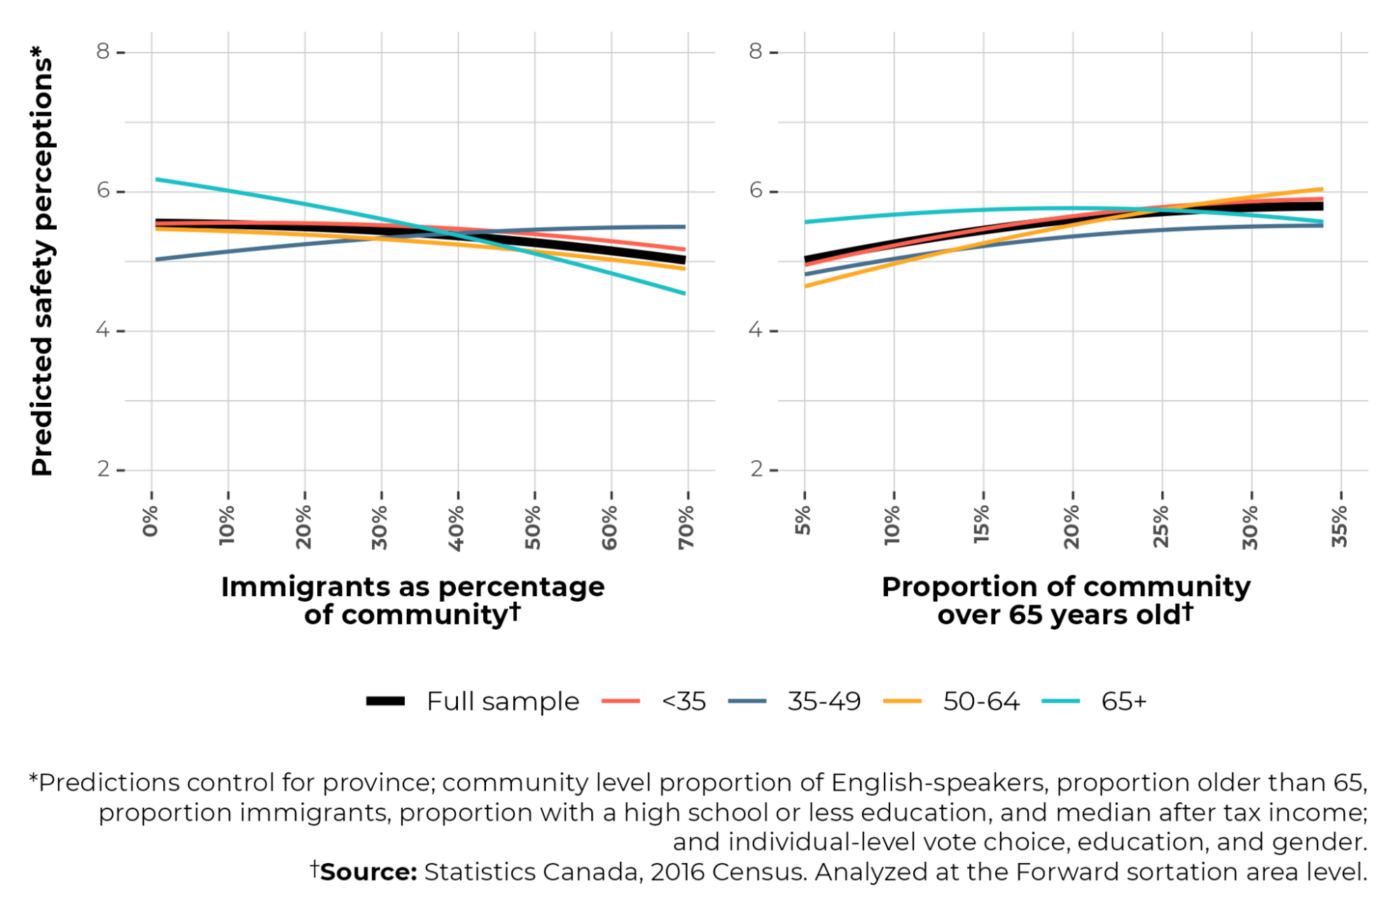 Two line graphs showing the predicted safety perception among the percentage of immigrants in a community (left graph) and the percentage of those over 65 years old in a community (right graph).